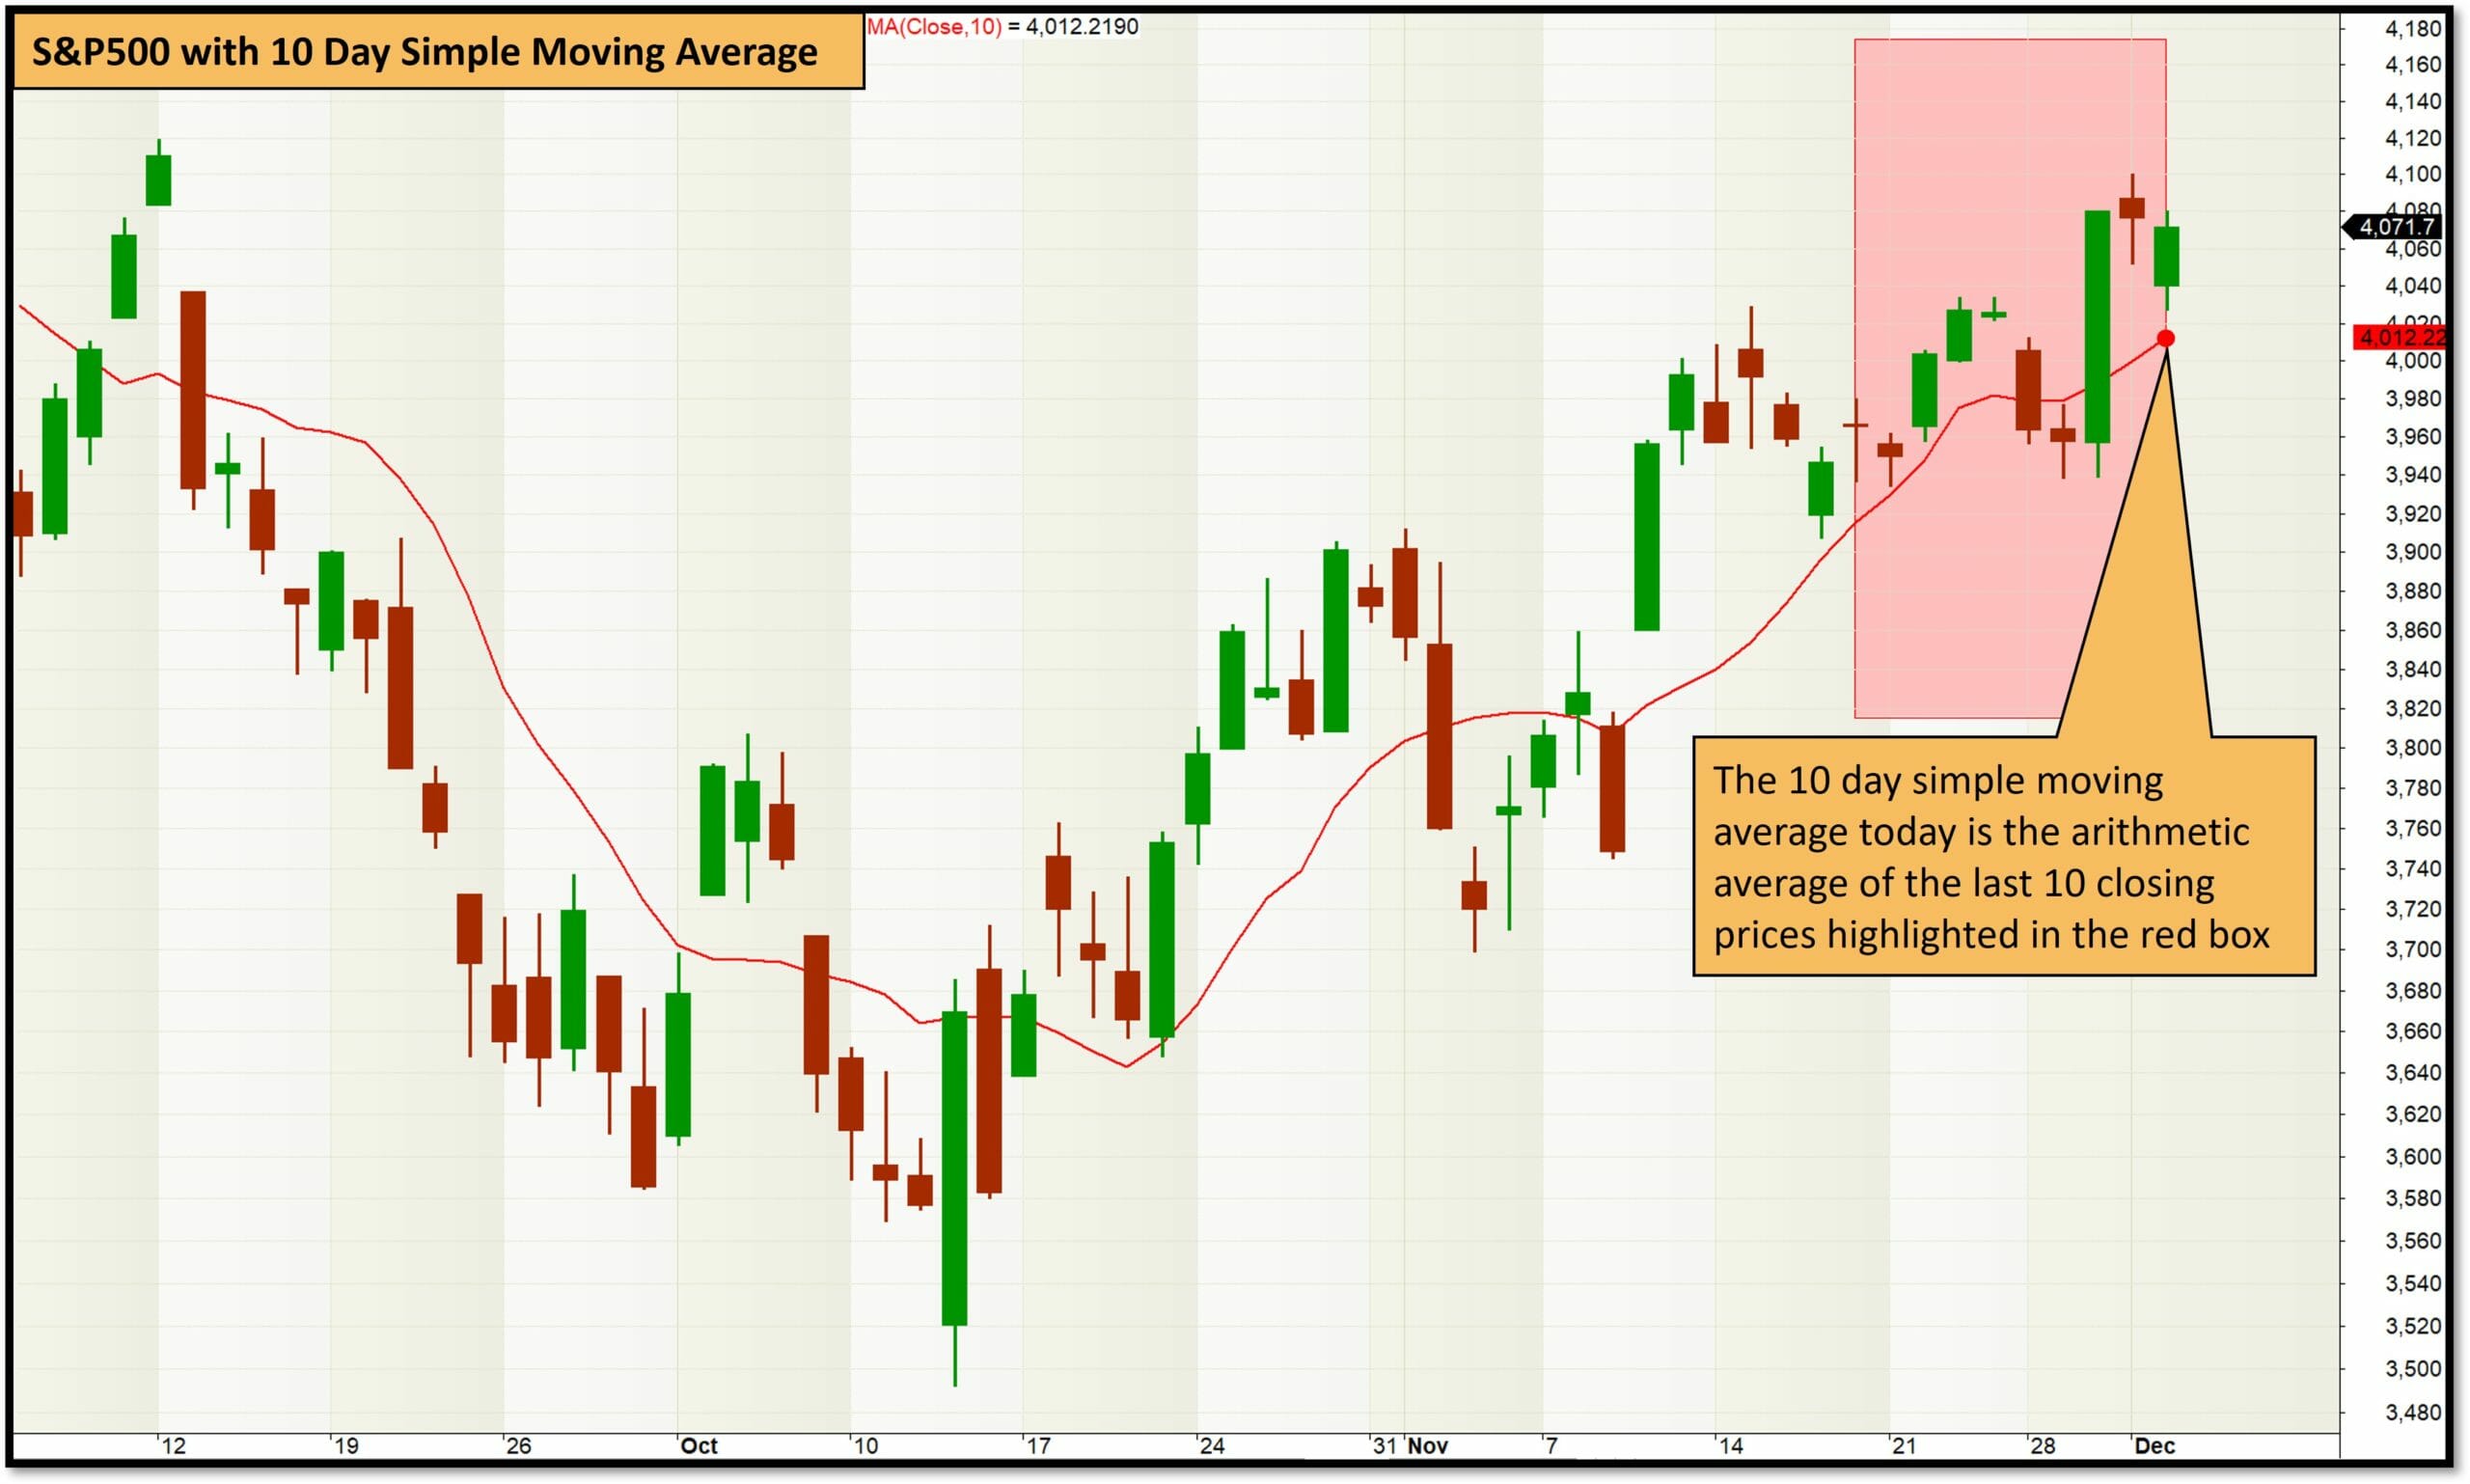 Ultimate guide to moving averages - calculation of the 10 day simple moving average